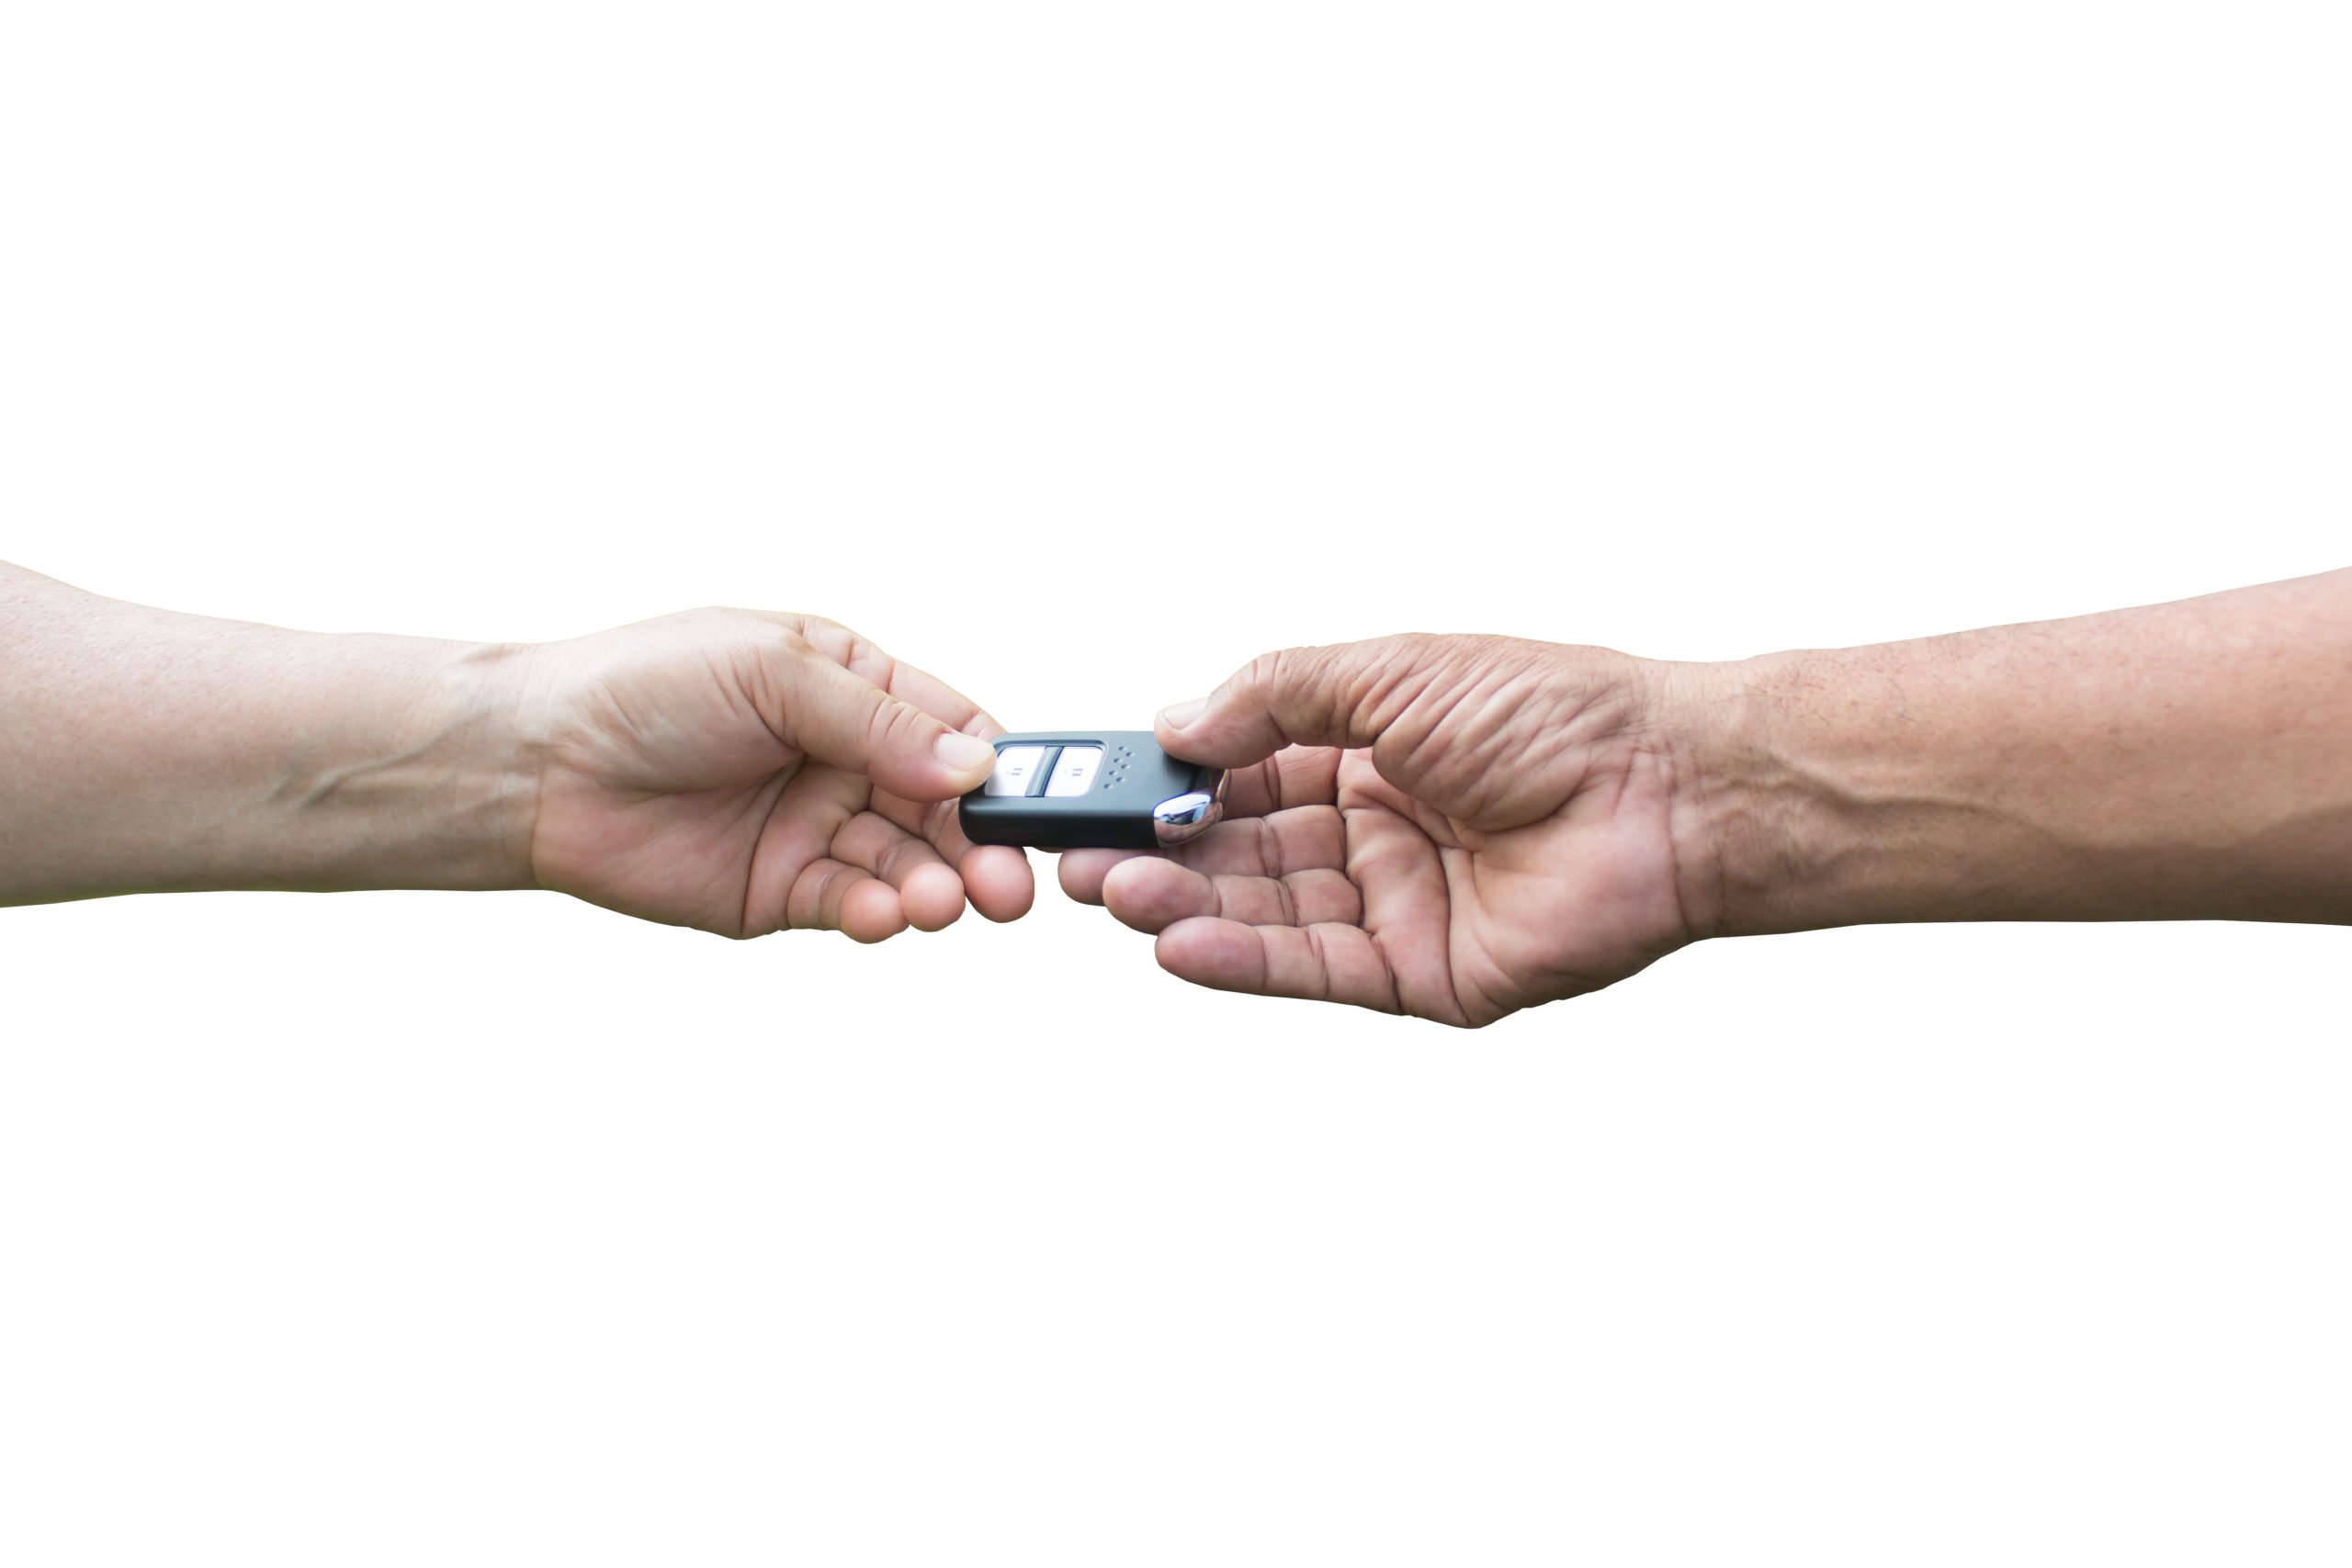 Two hands exchanging a car key fob